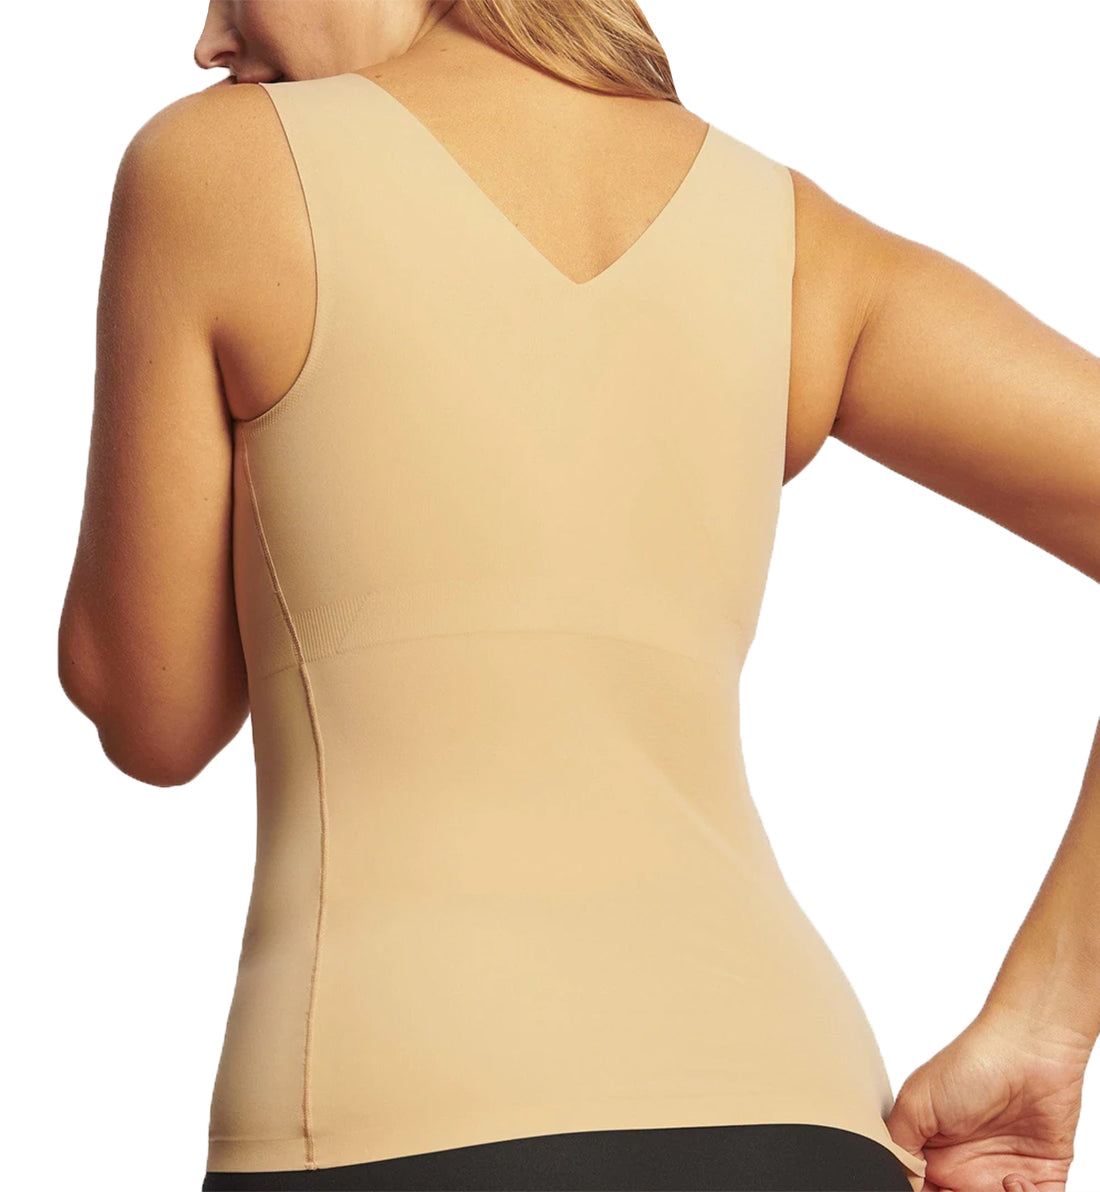 Evelyn &amp; Bobbie Smoothing Cami (1829A),Small,Sand - Sand,Small